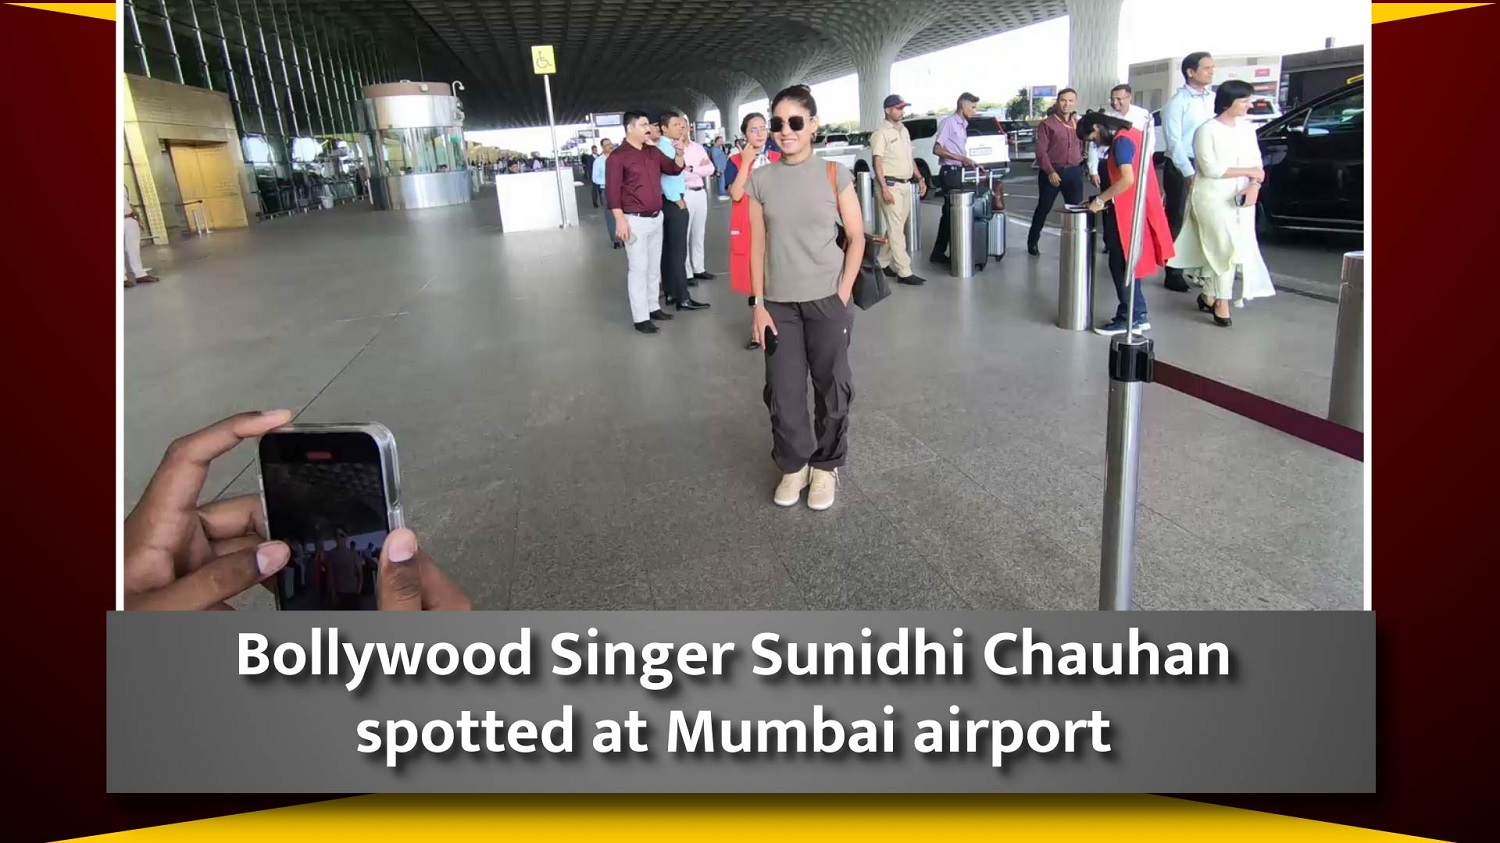 Bollywood Singer Sunidhi Chauhan was spotted at Mumbai airport